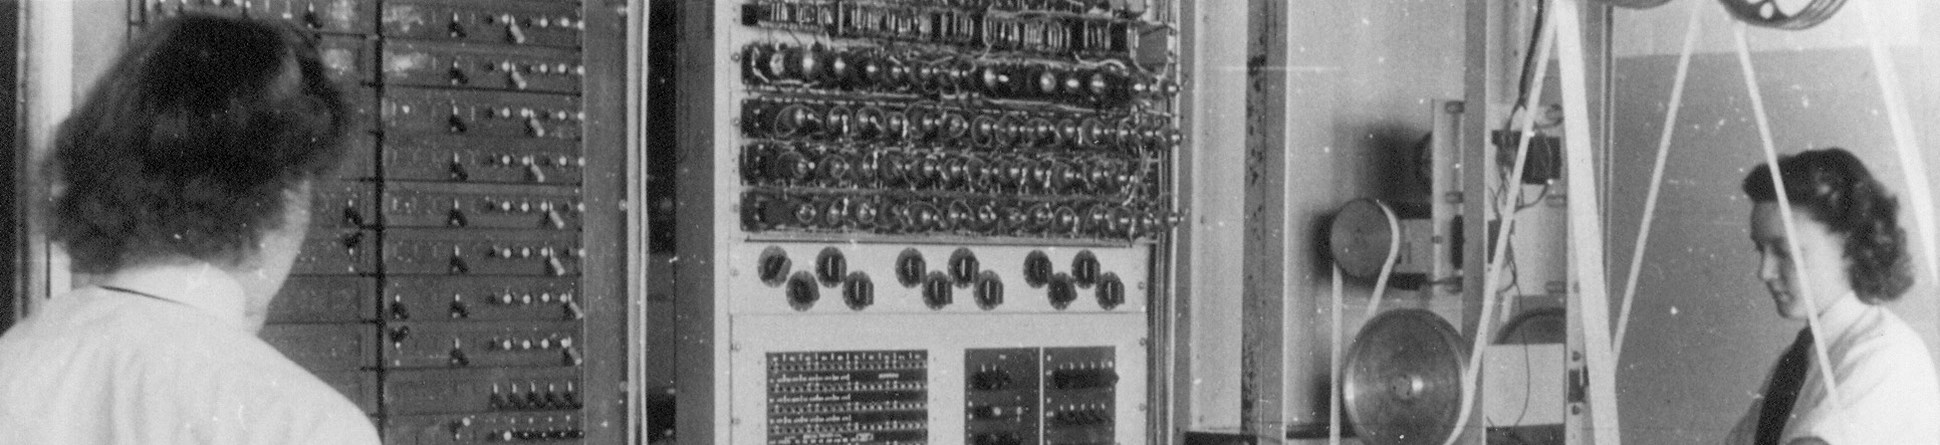 Black-and-white photograph of women 'computers' at Bletchley Park during the Second World War.